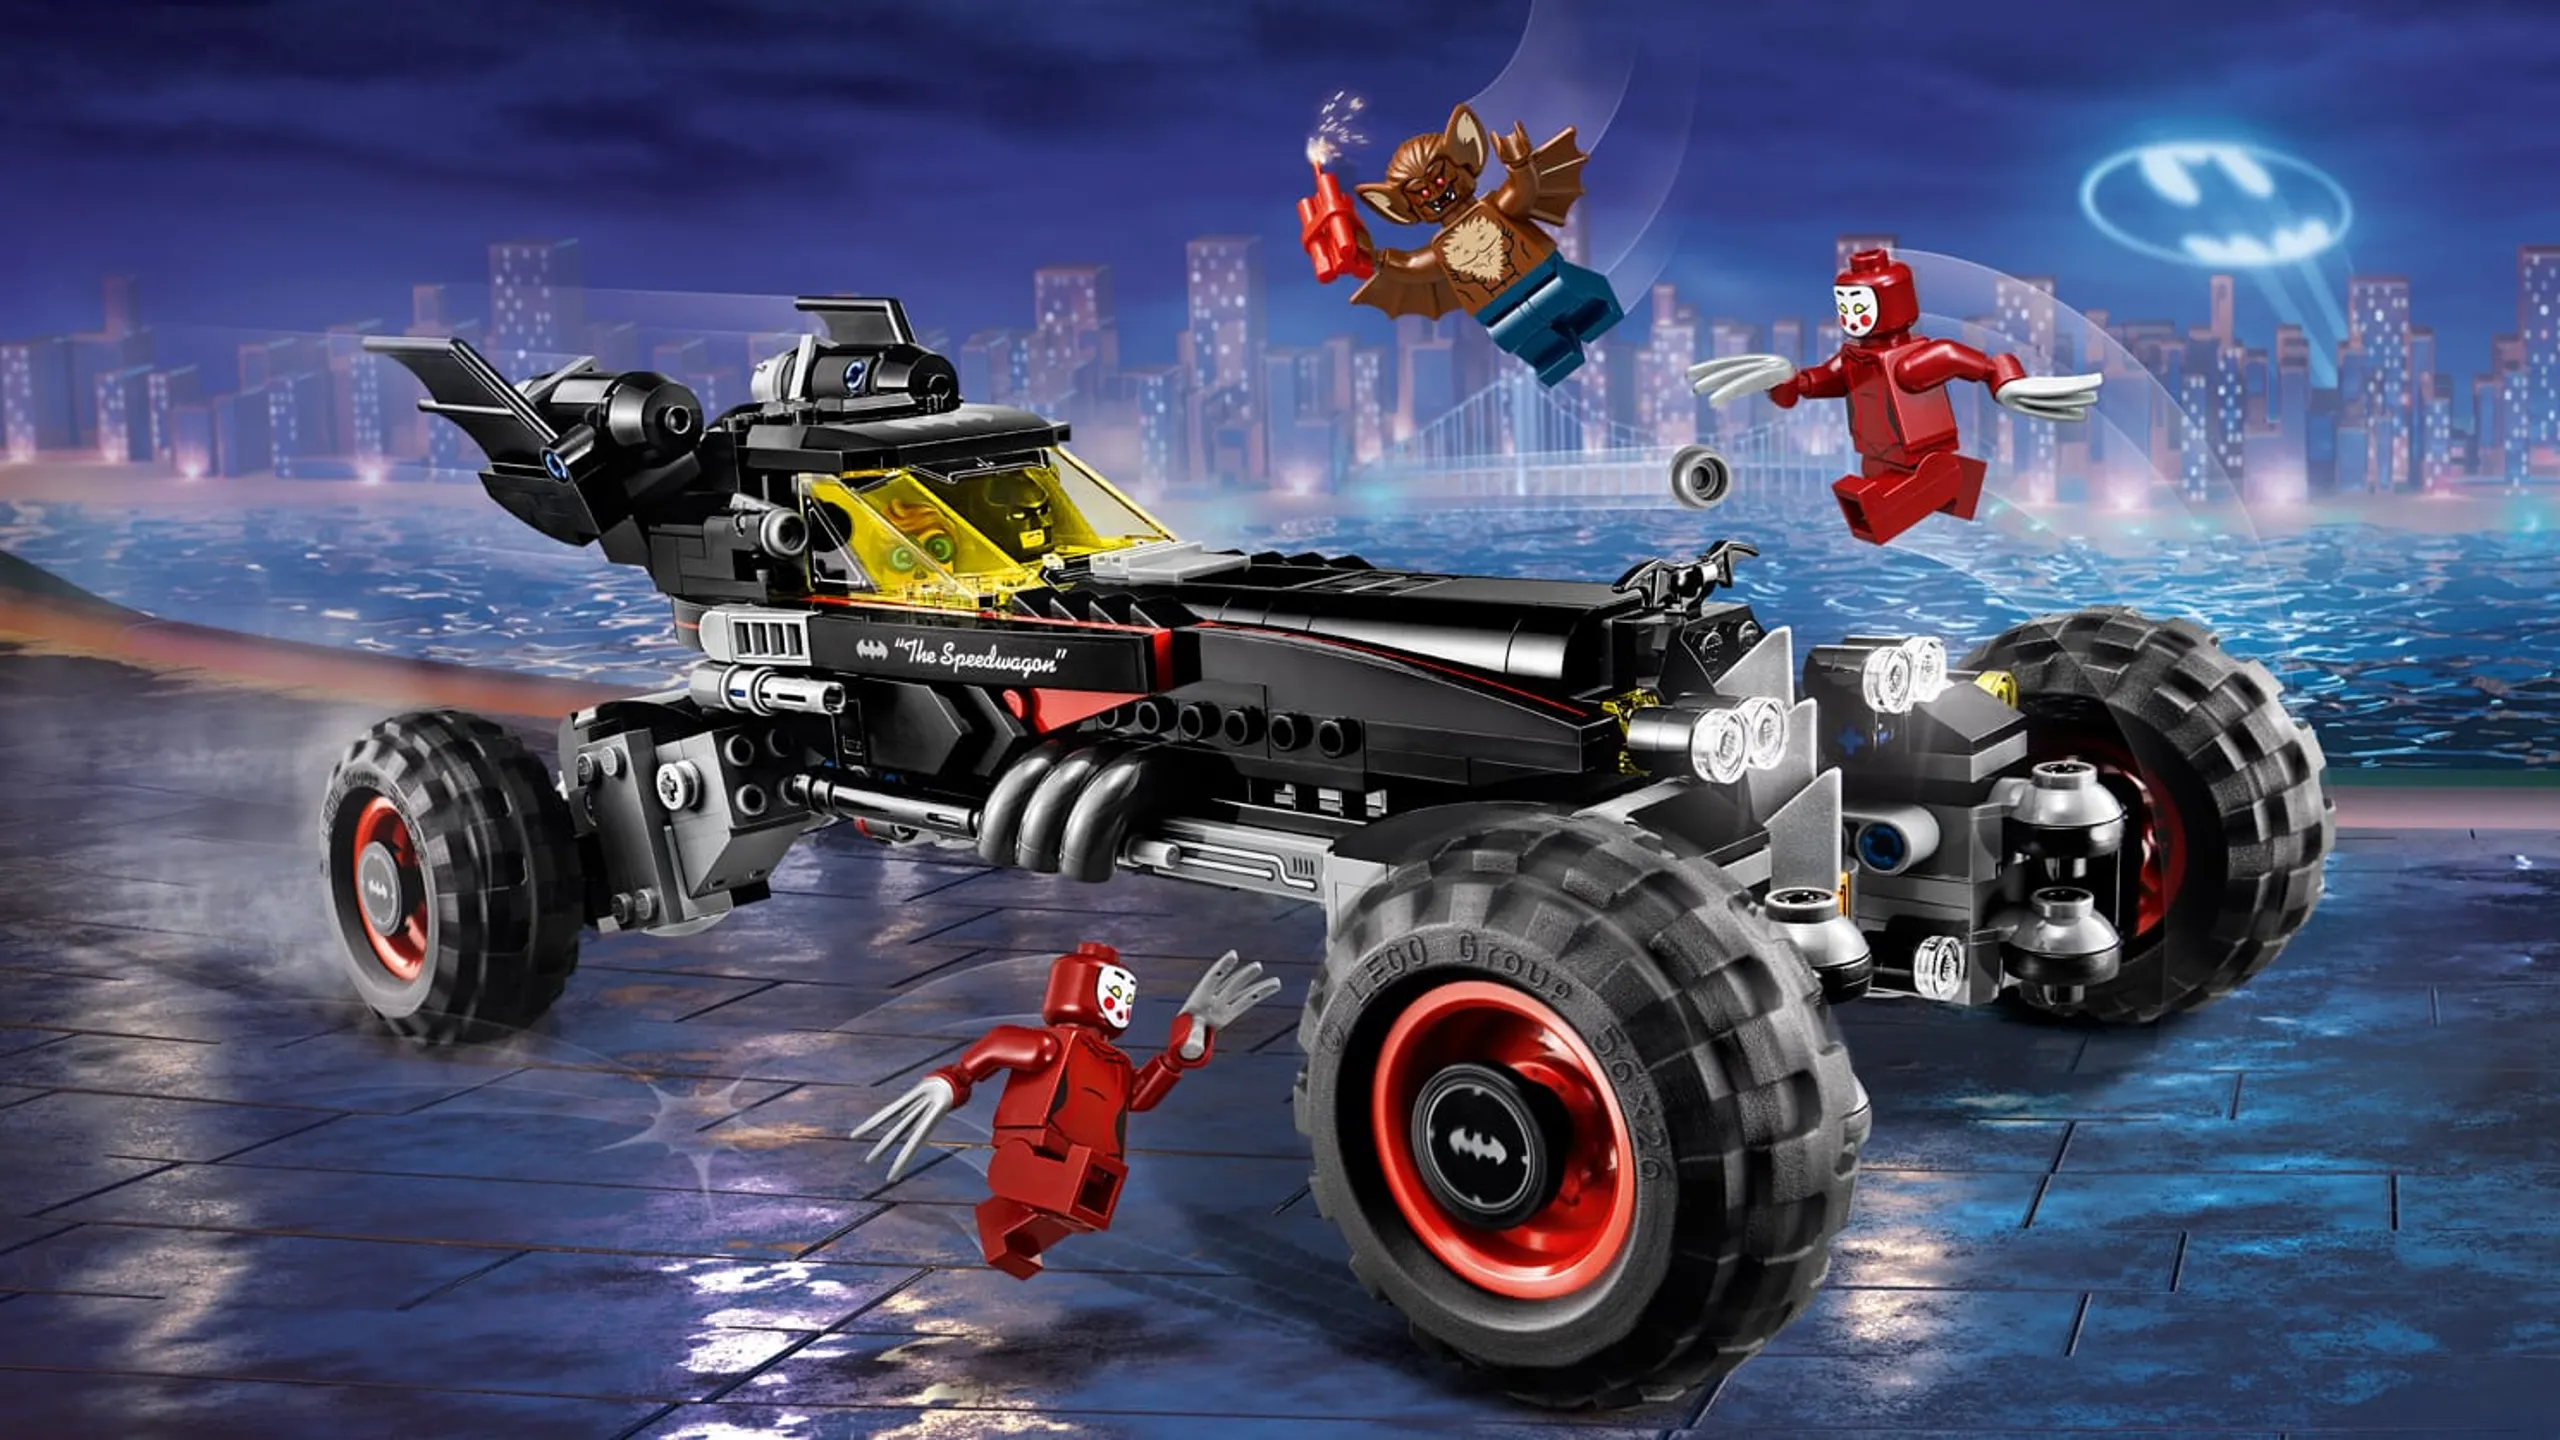 LEGO Batman Movie the Batmobile - 70905 - Batman and his sidekick Robin fight against the Man-Bat and the Kabuki Twins in this monster truck version of the Batmobile.